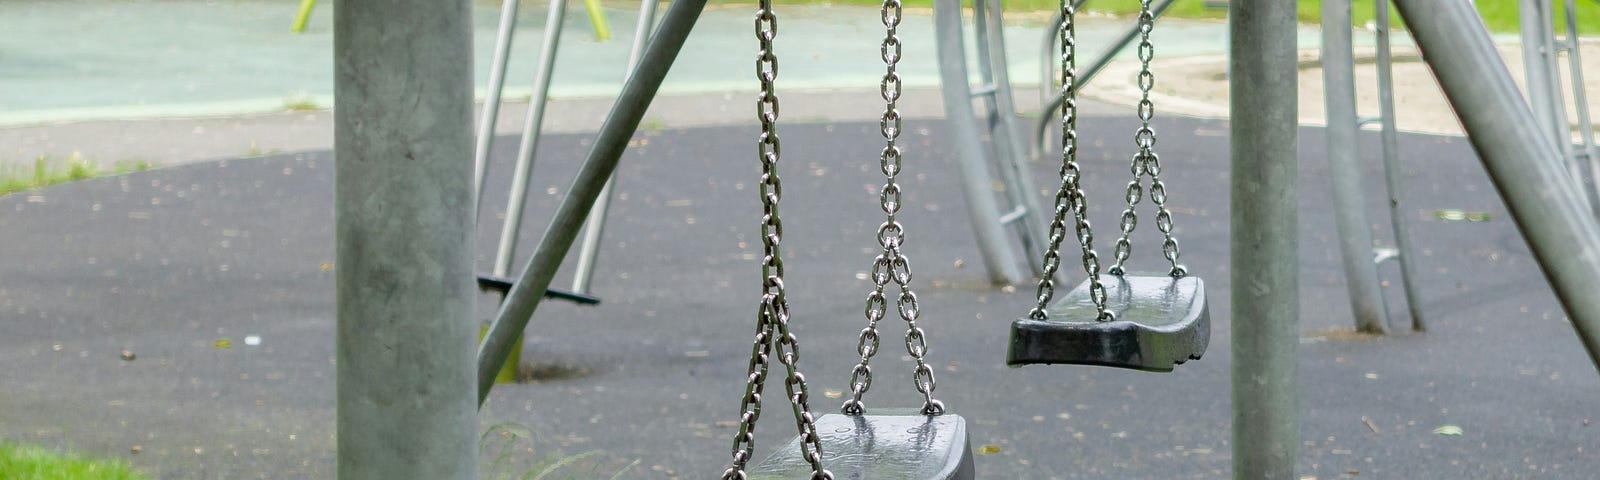 Closeup of a swing set at a playground.